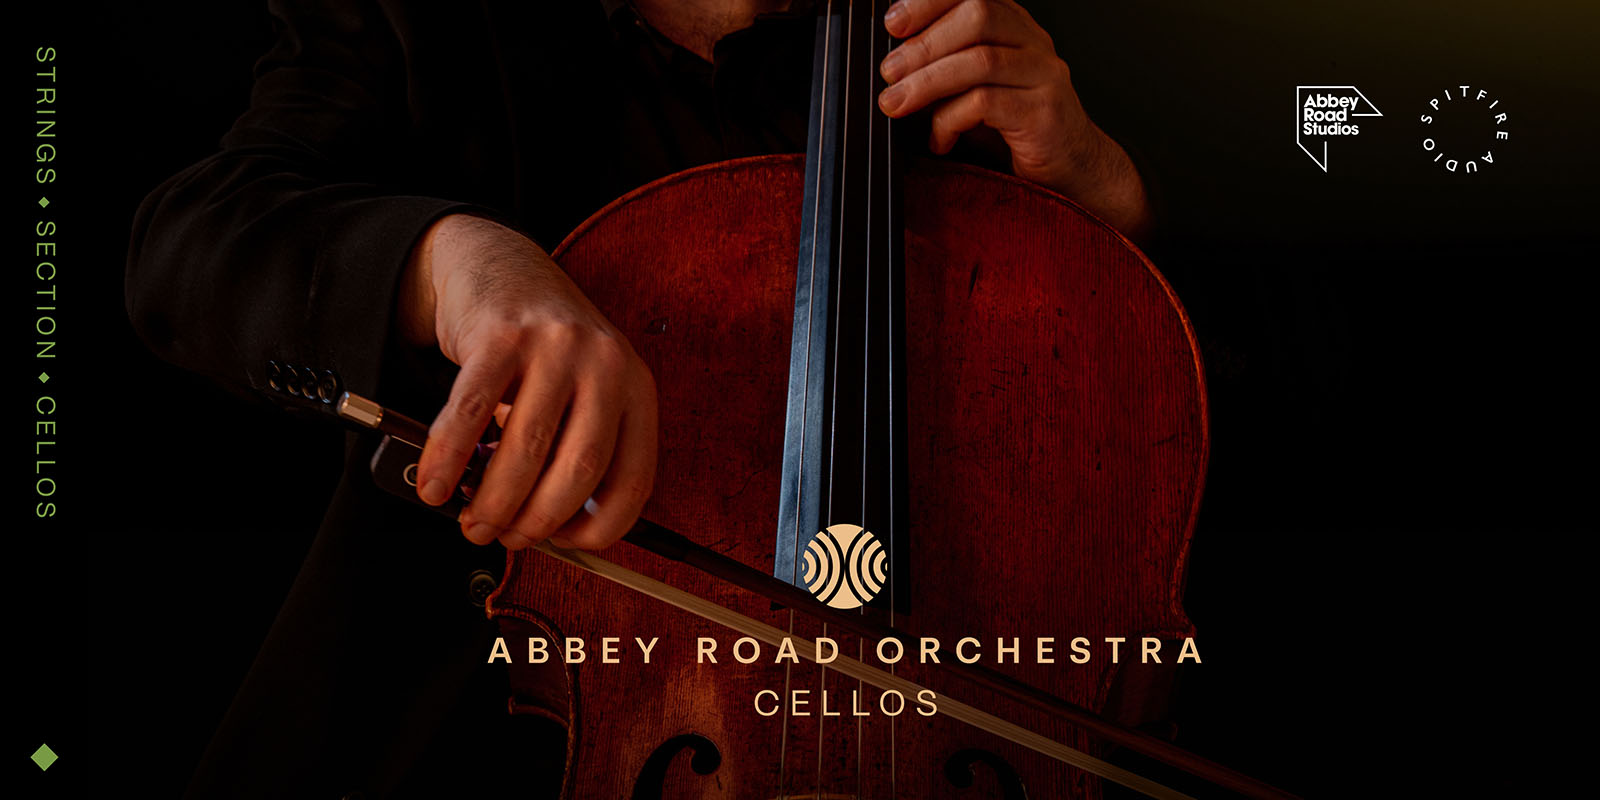 Announcing Abbey Road Orchestra: Cellos